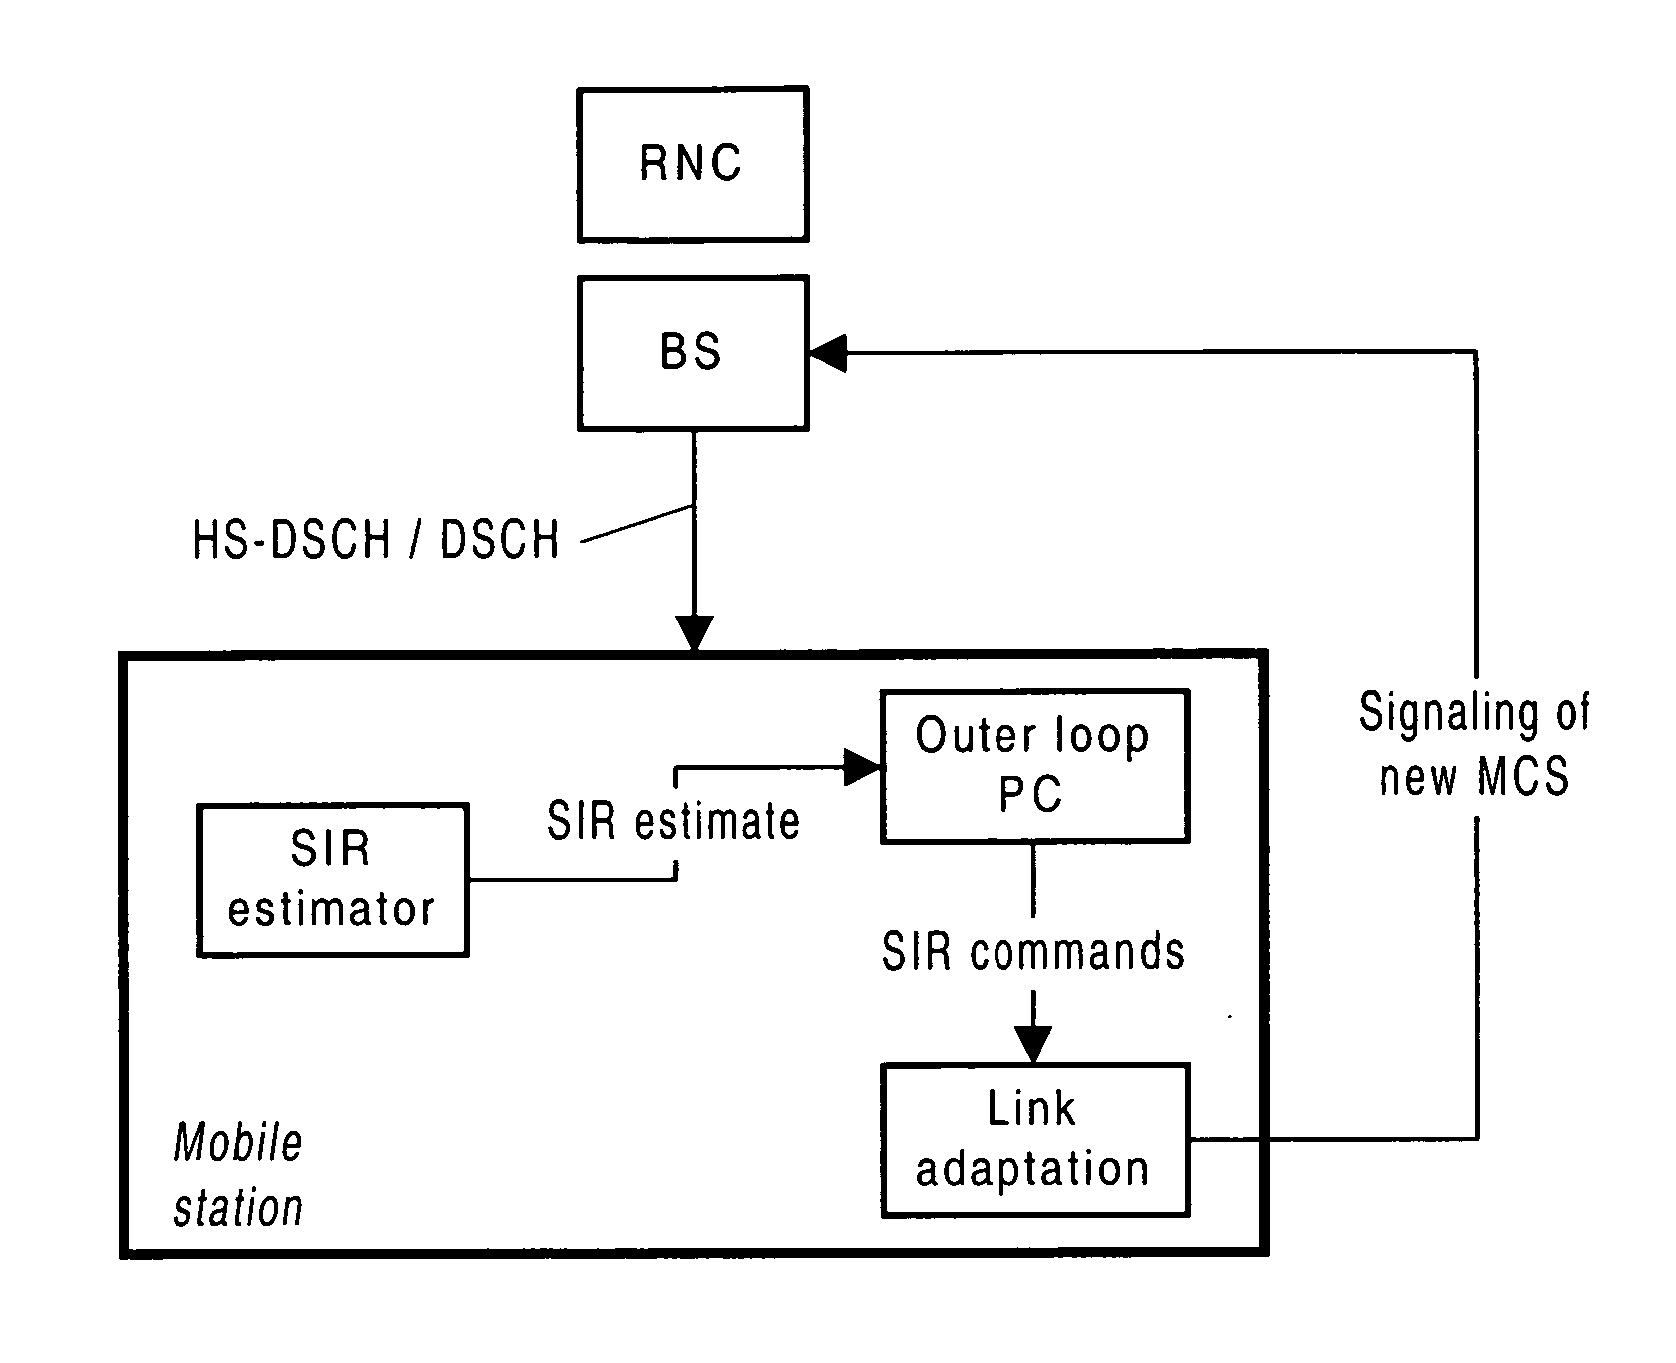 Method for determining whether to peform link adaptation in WCDMA communications